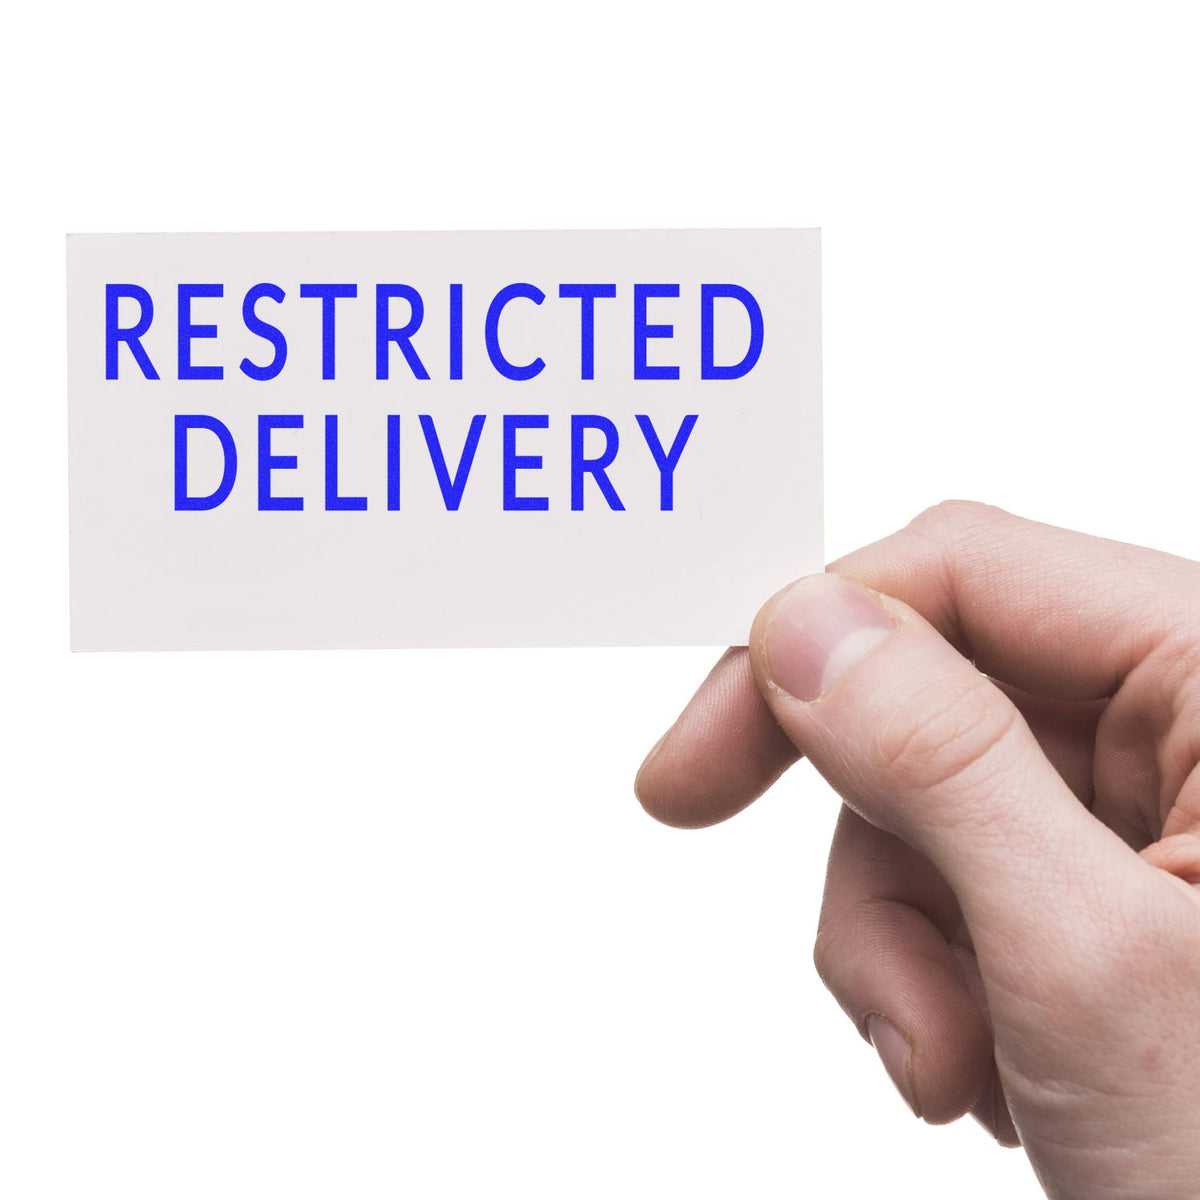 Restricted Delivery Rubber Stamp In Use Photo